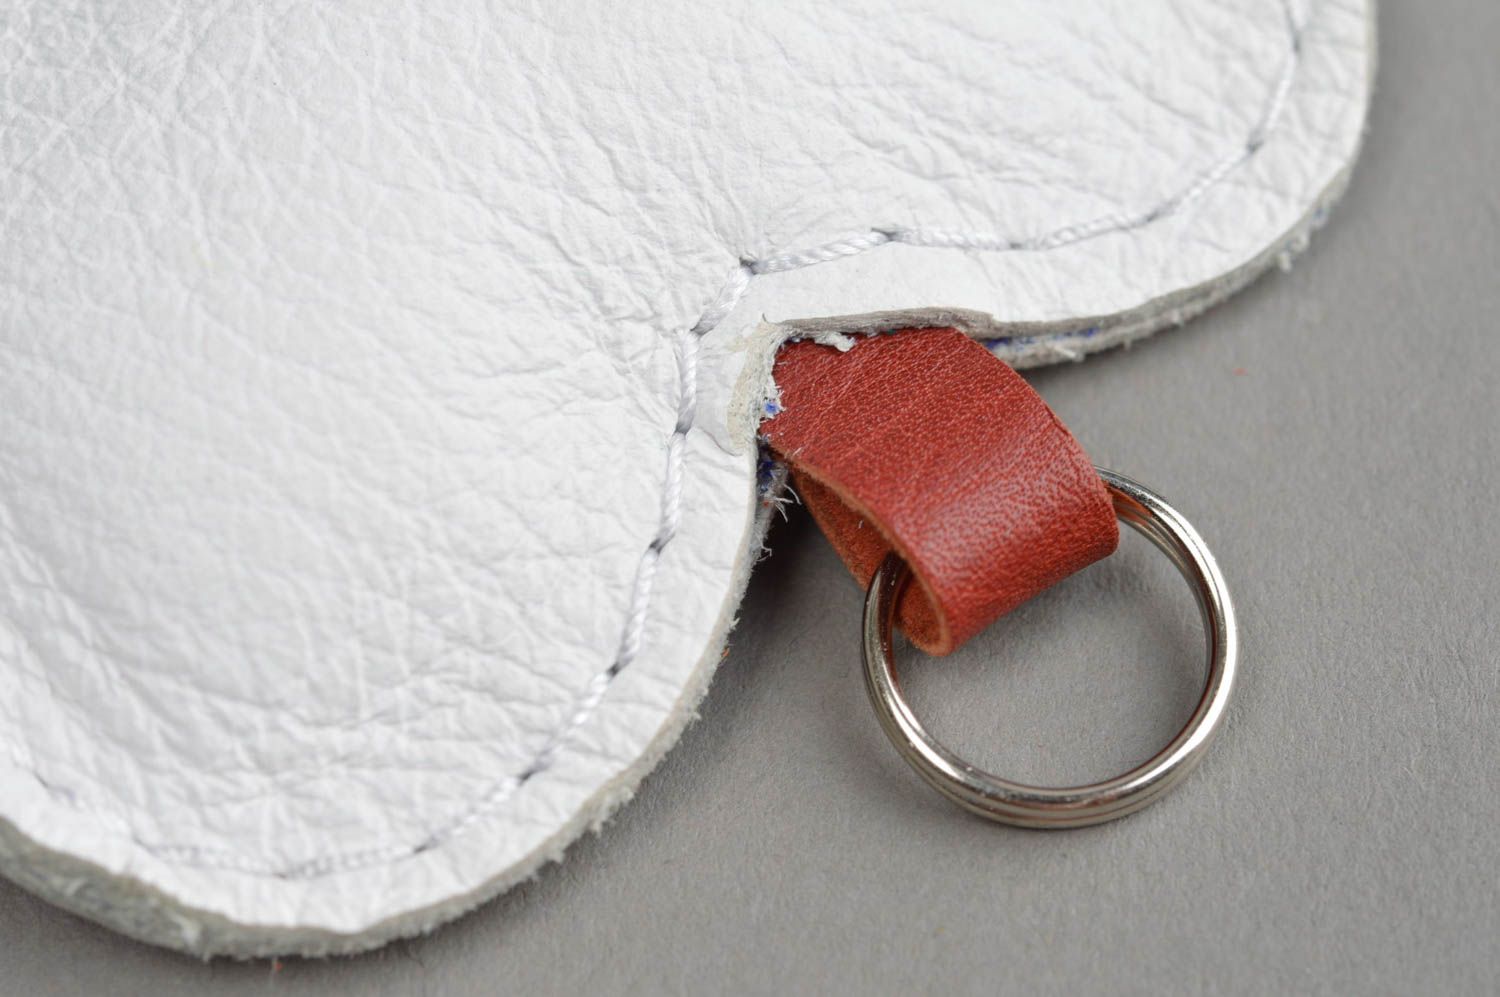 Handmade leather goods unique keychain gift ideas for women leather key fob photo 4